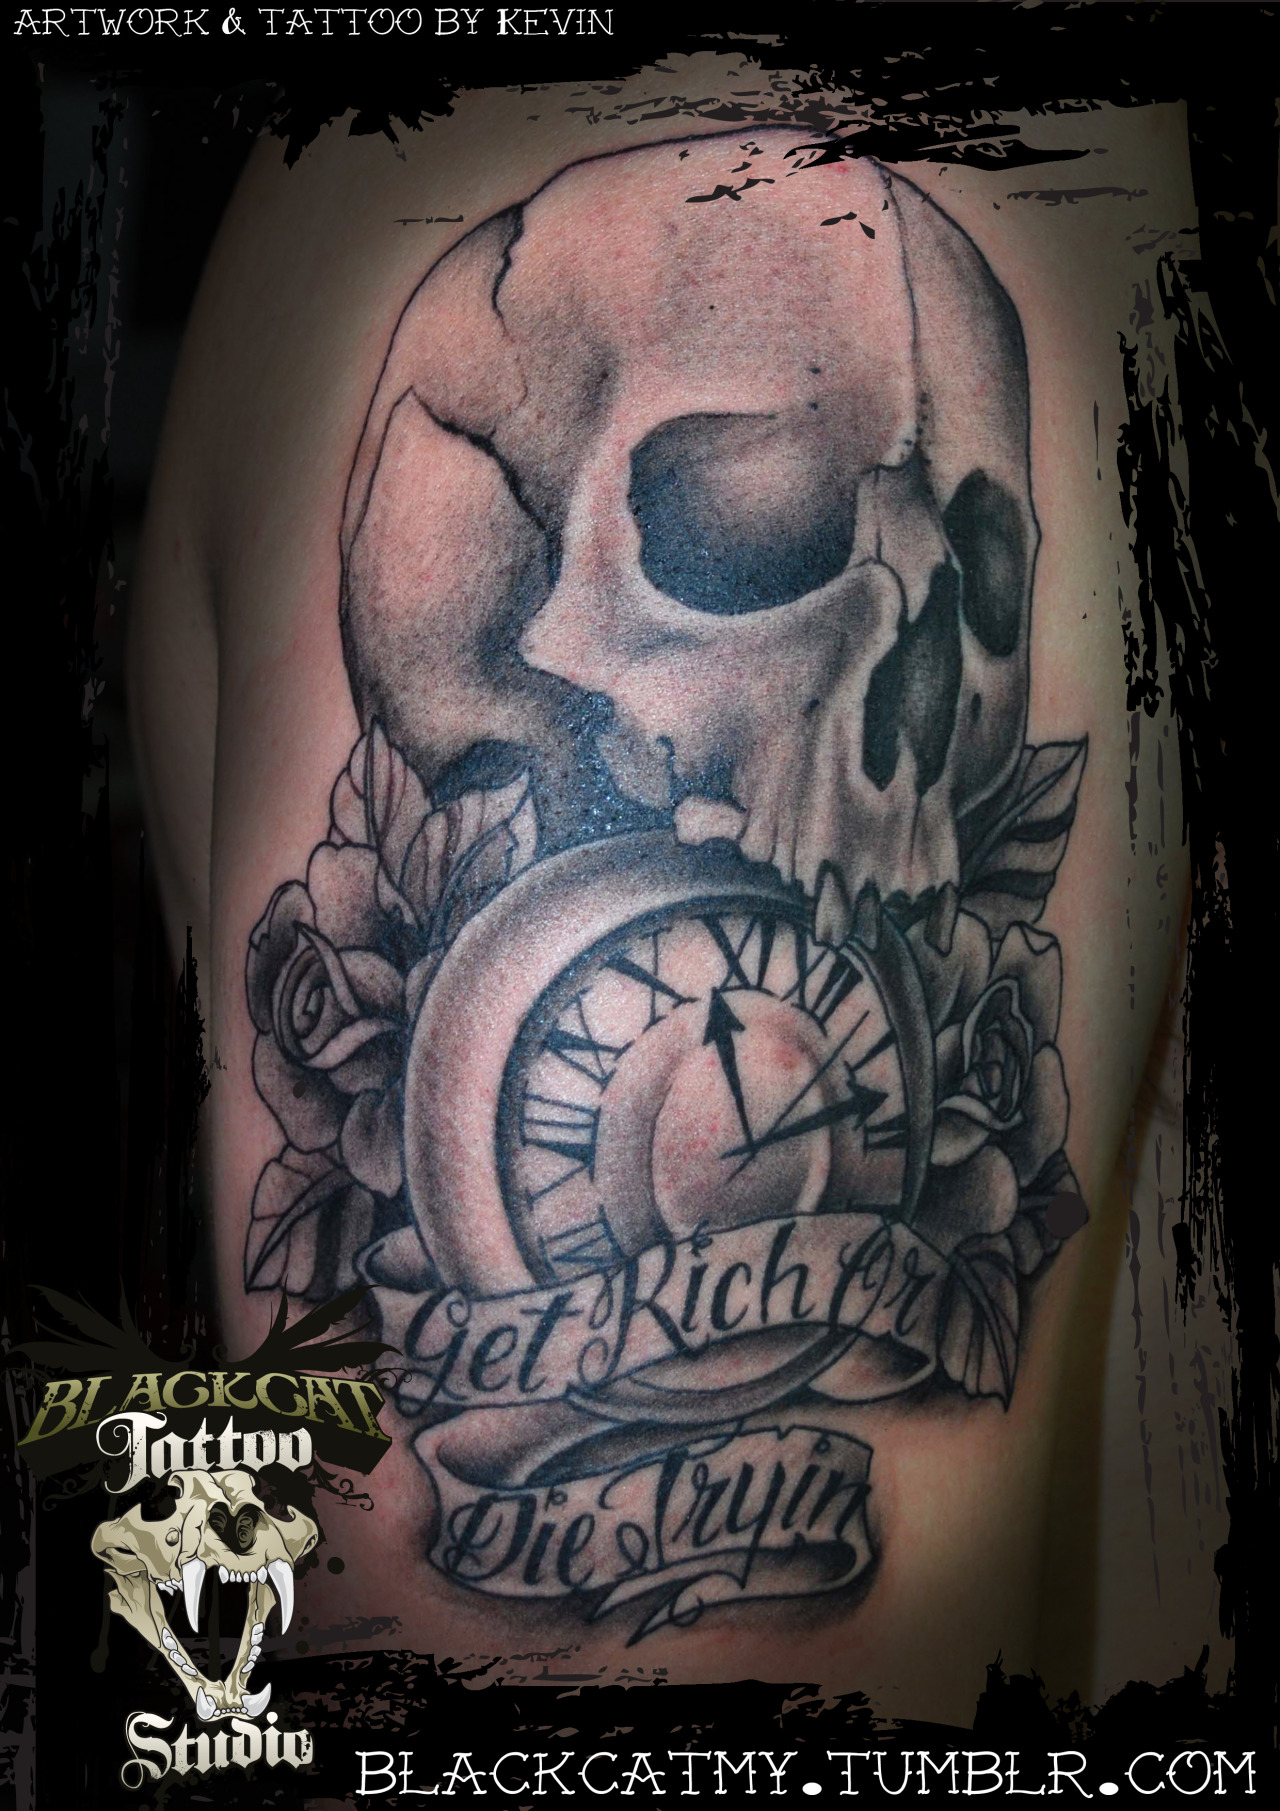 Get rich or die trying  Tattoo by ElectronicSin on DeviantArt